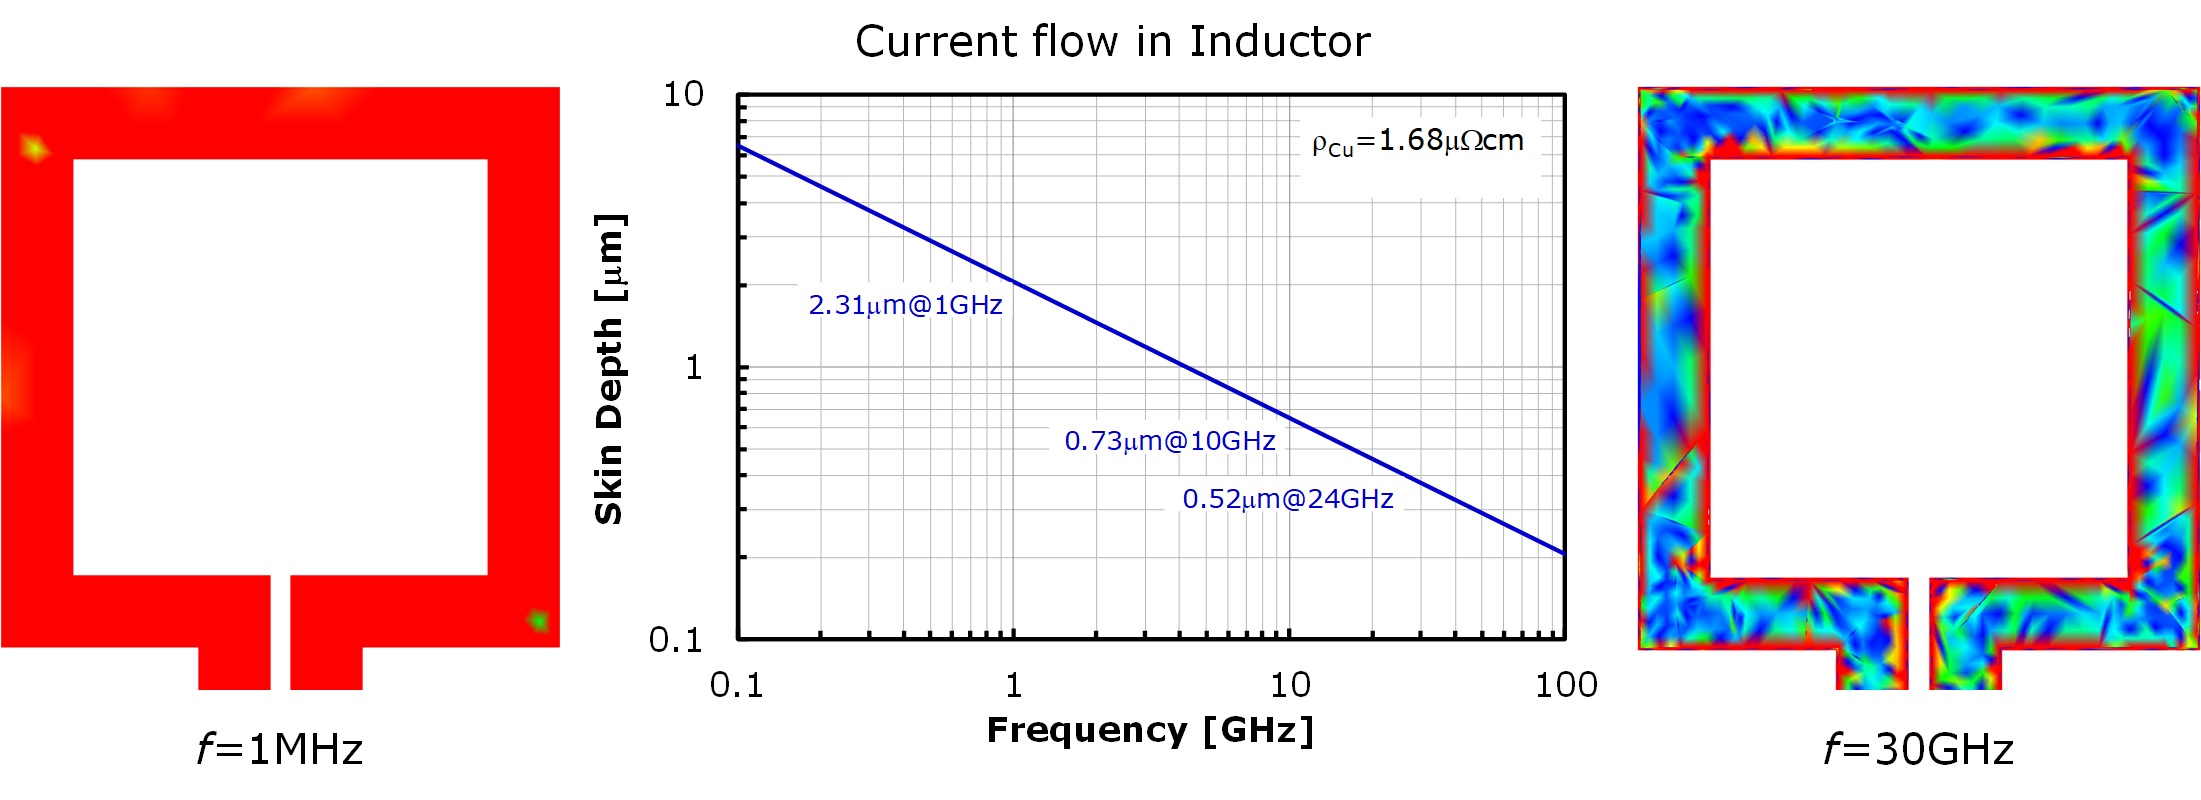 current flow in inductor